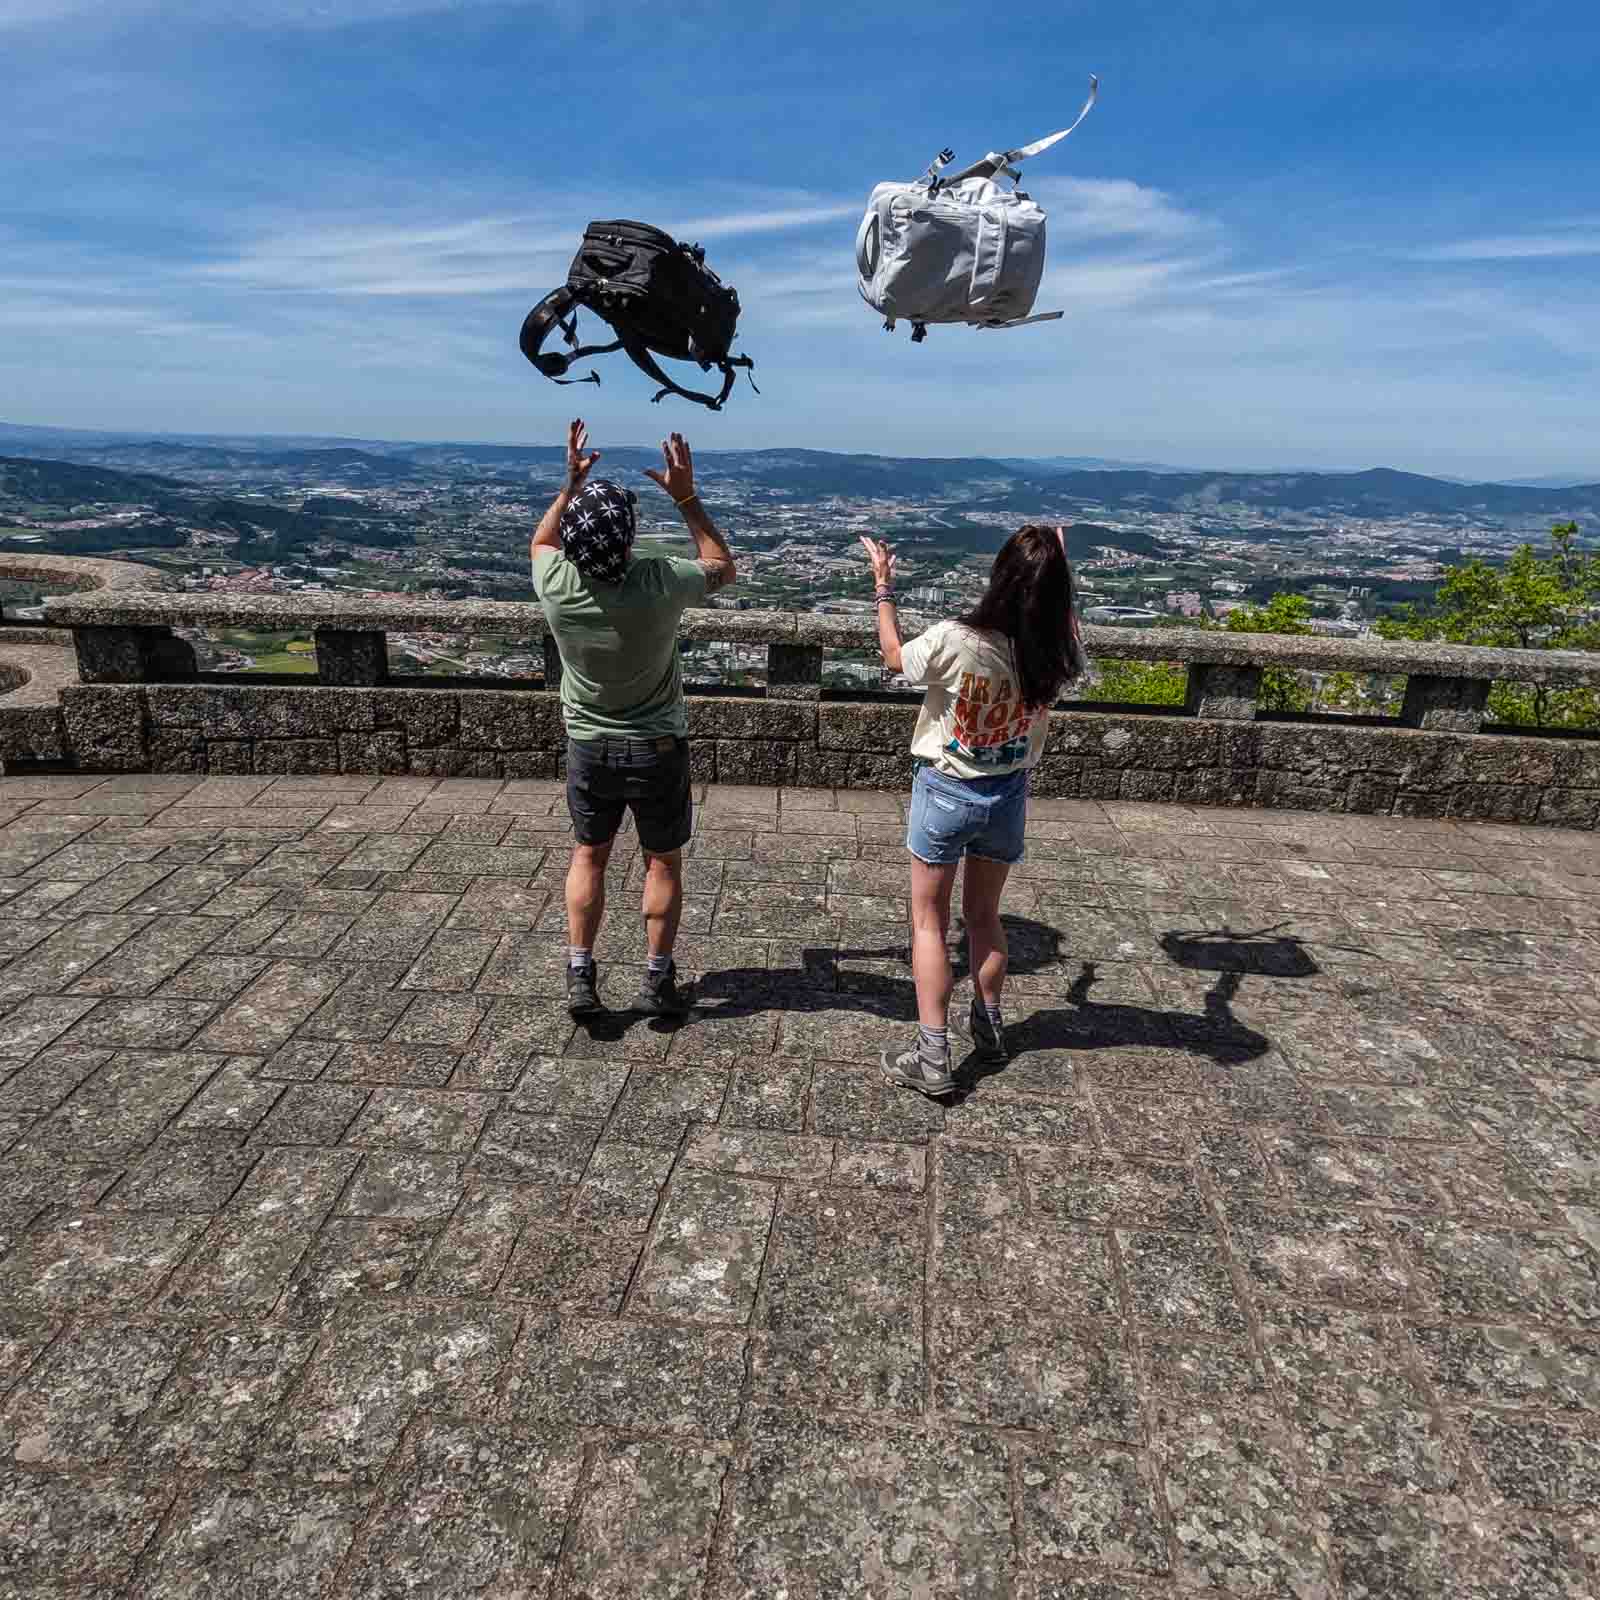 Couple throwing backpacks in the air - Portugal Travel Guide